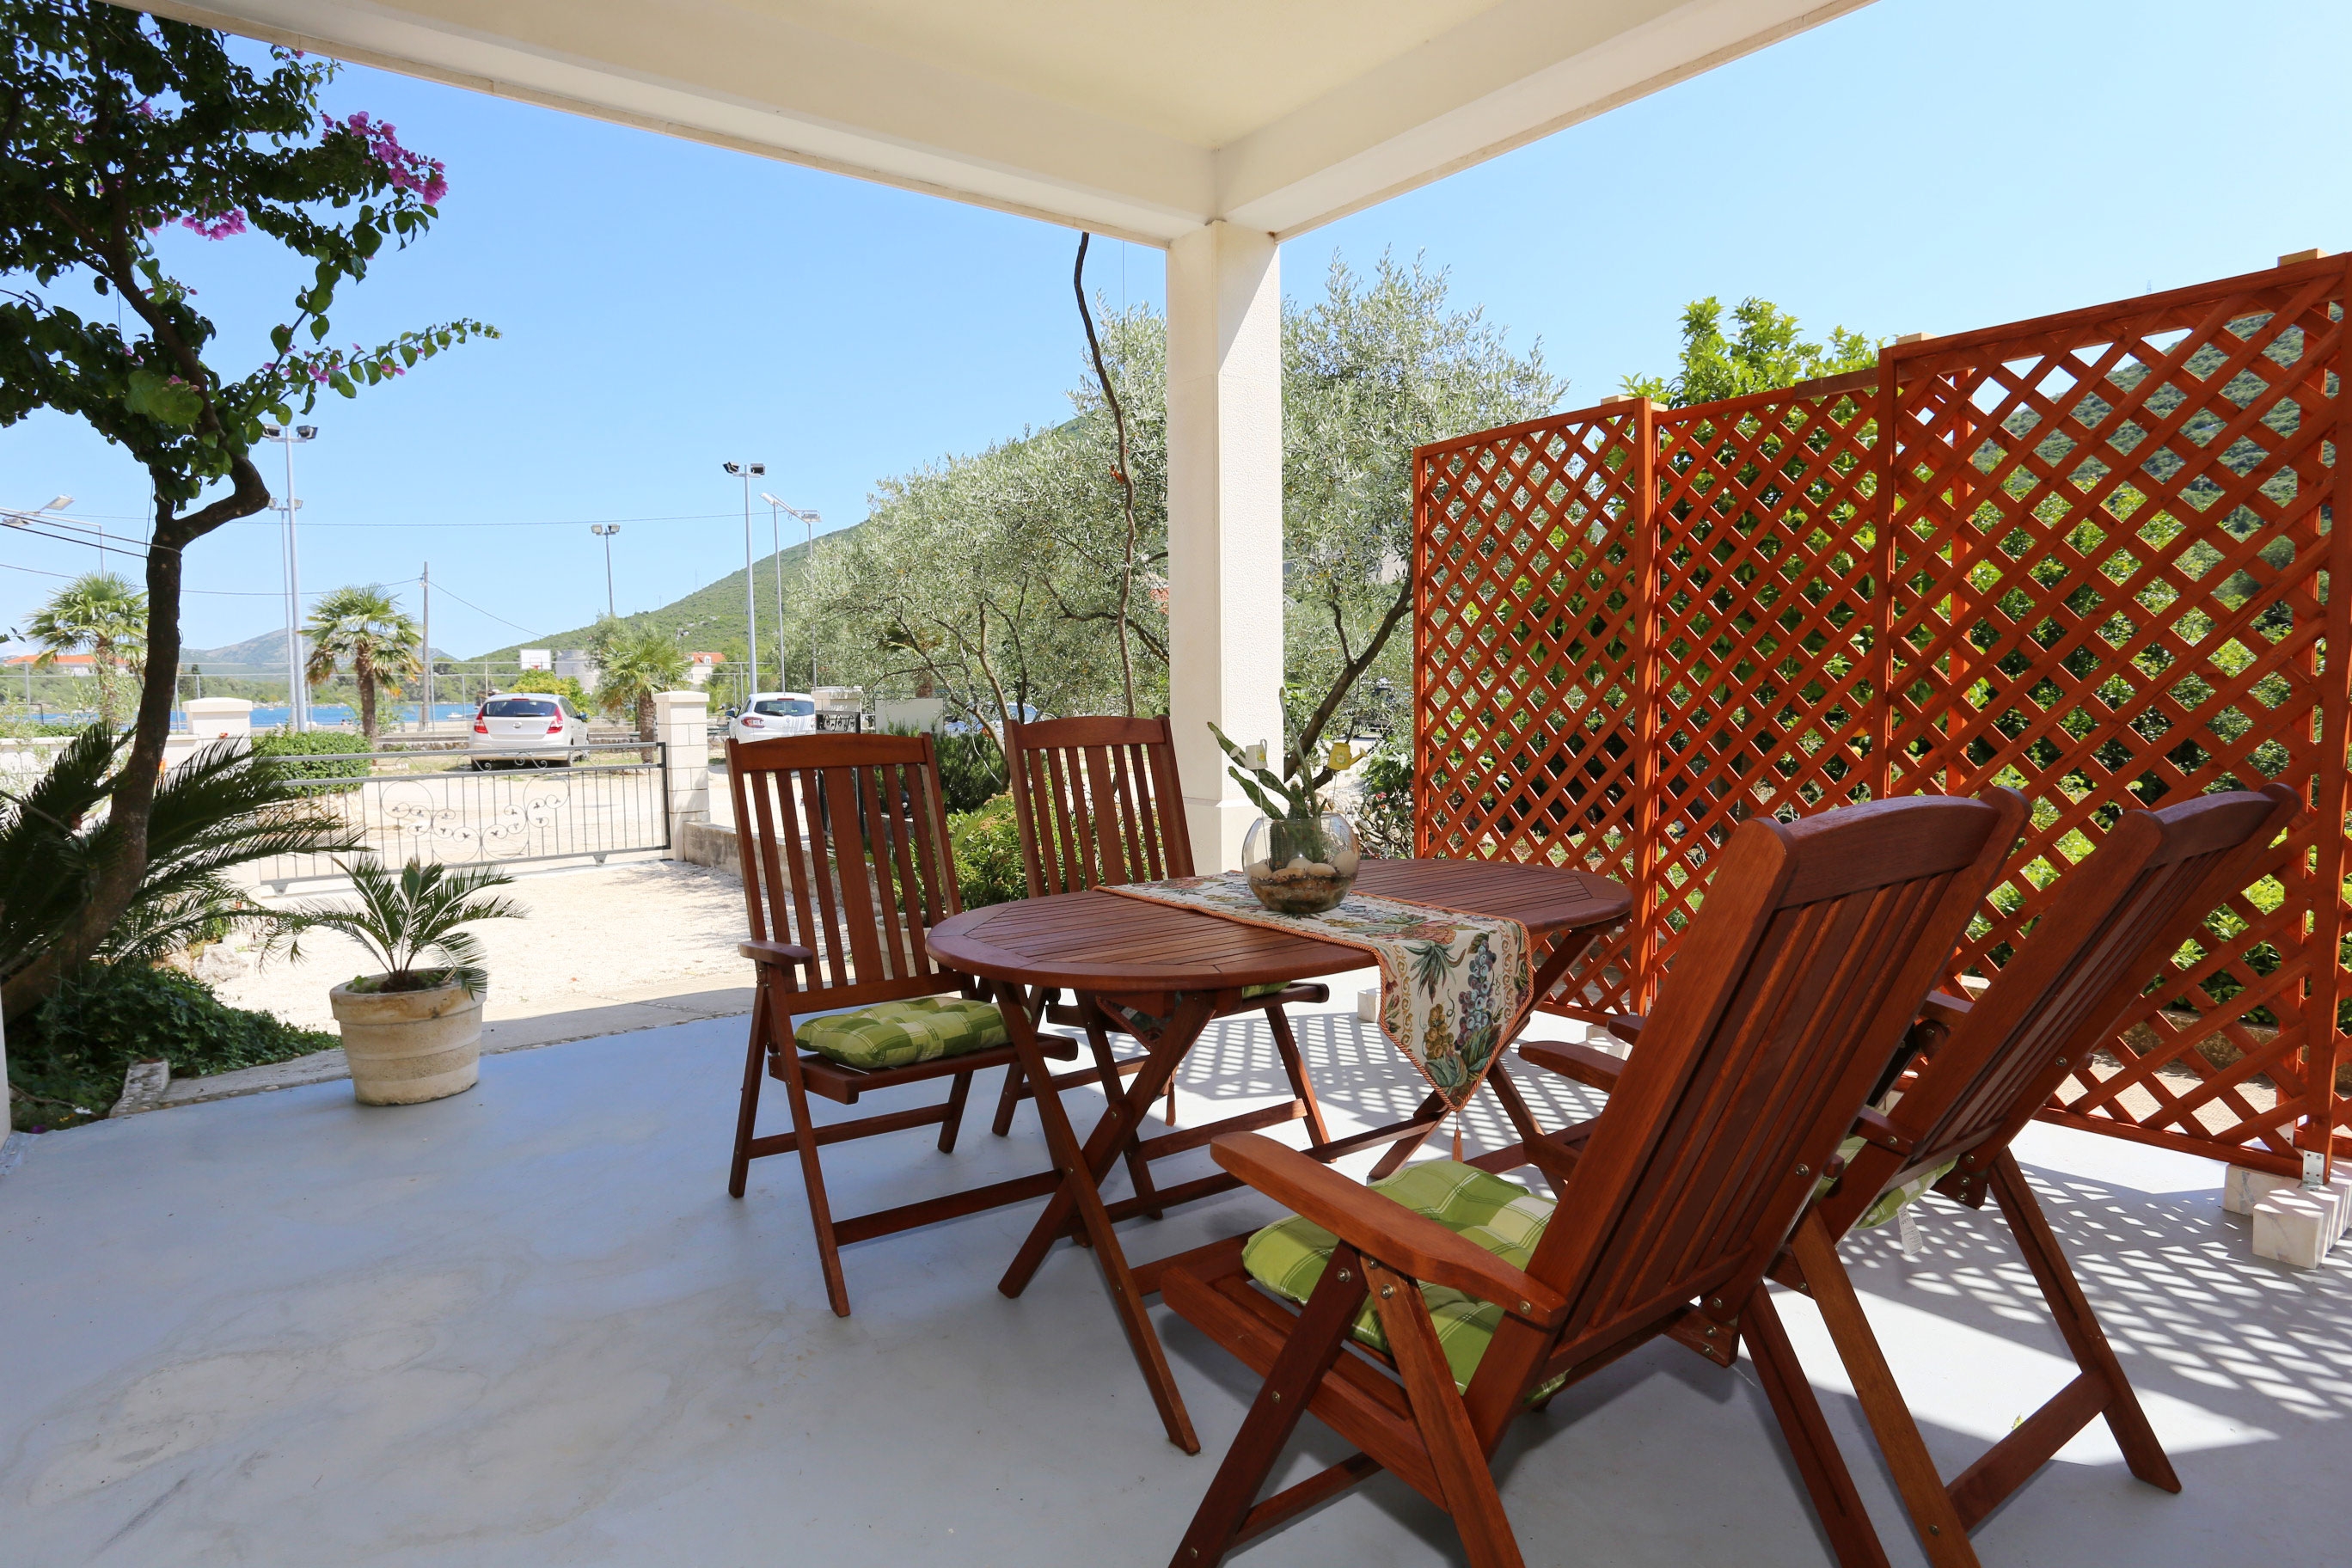 Villa GOLDEN ROSE - modern house with 4 bedrooms, private pool, fenced yard, close to town and beach